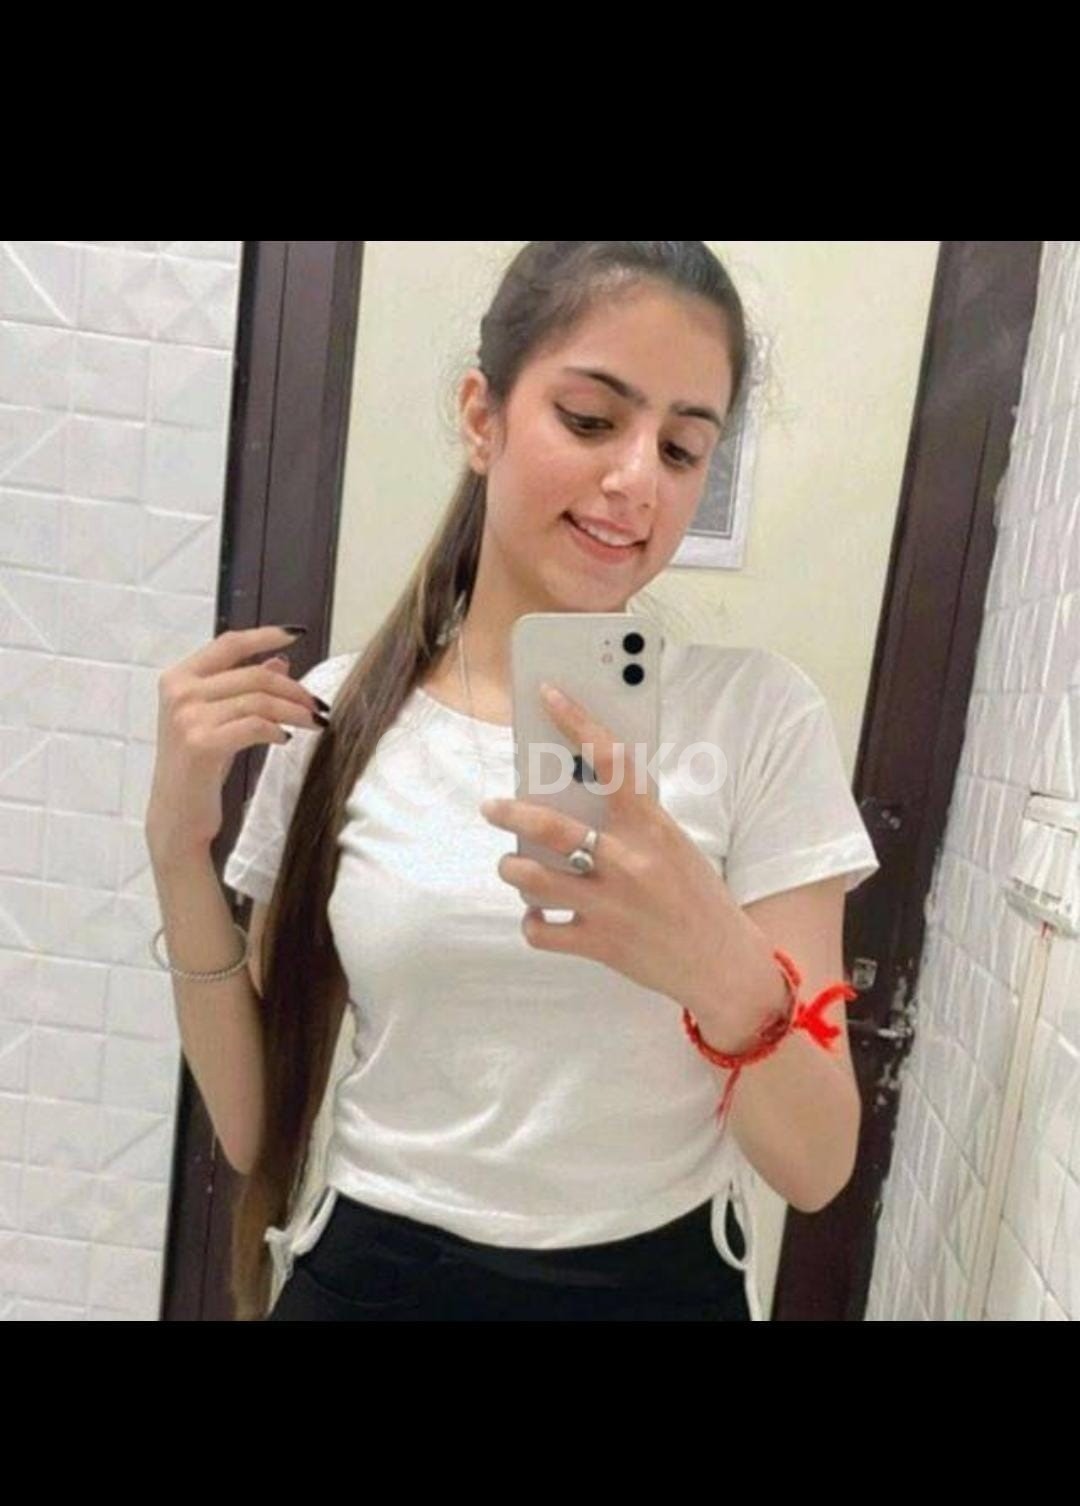 CALL ME Siya Chandigarh 987-84-902-68 AND TO HAND PAYMENT CALL ME ANYTIME FOR REAL AND GENUINE SERVICE WITHOUT ANY ADVAN